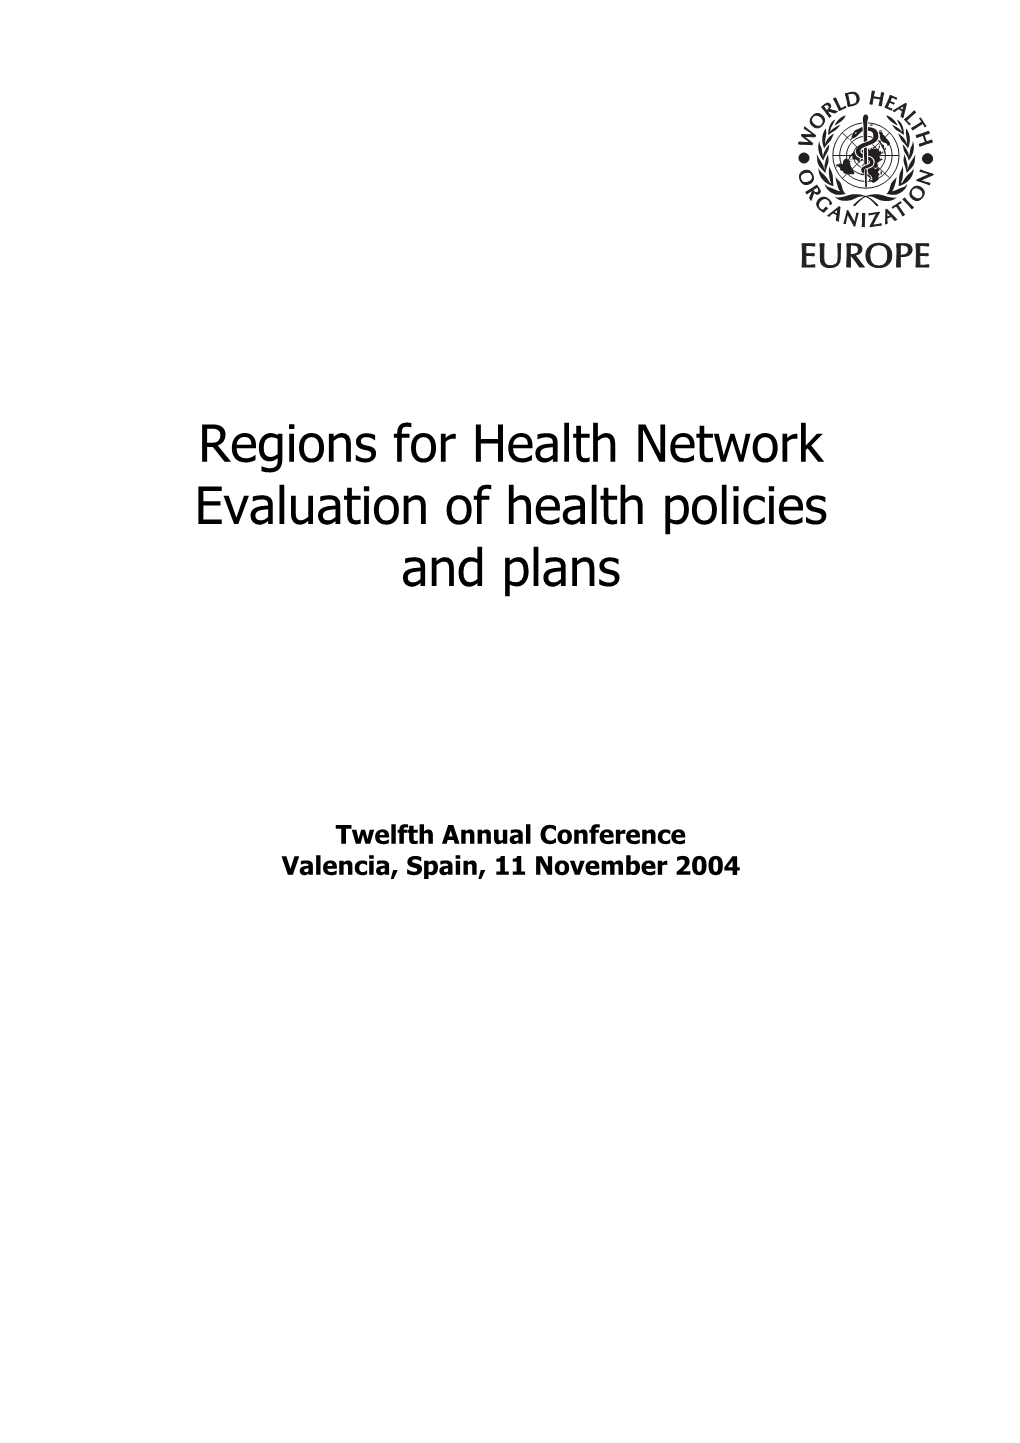 RHN Twelfth Annual Conference. Evaluation of Health Policies And